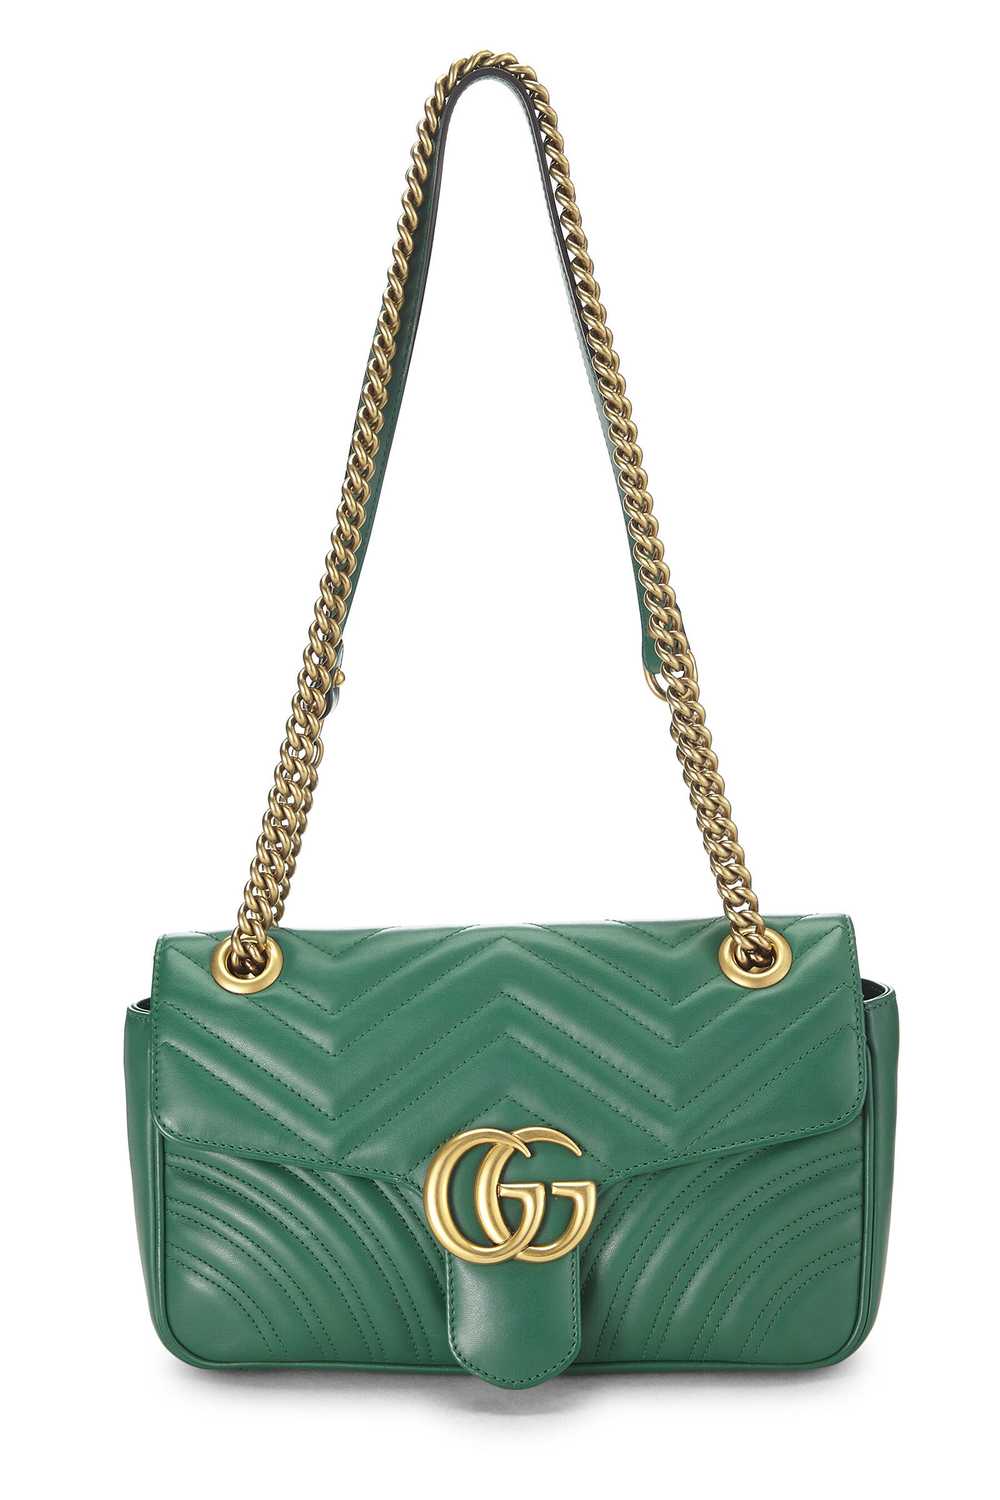 Green Leather GG Marmont Shoulder Bag Small - image 1